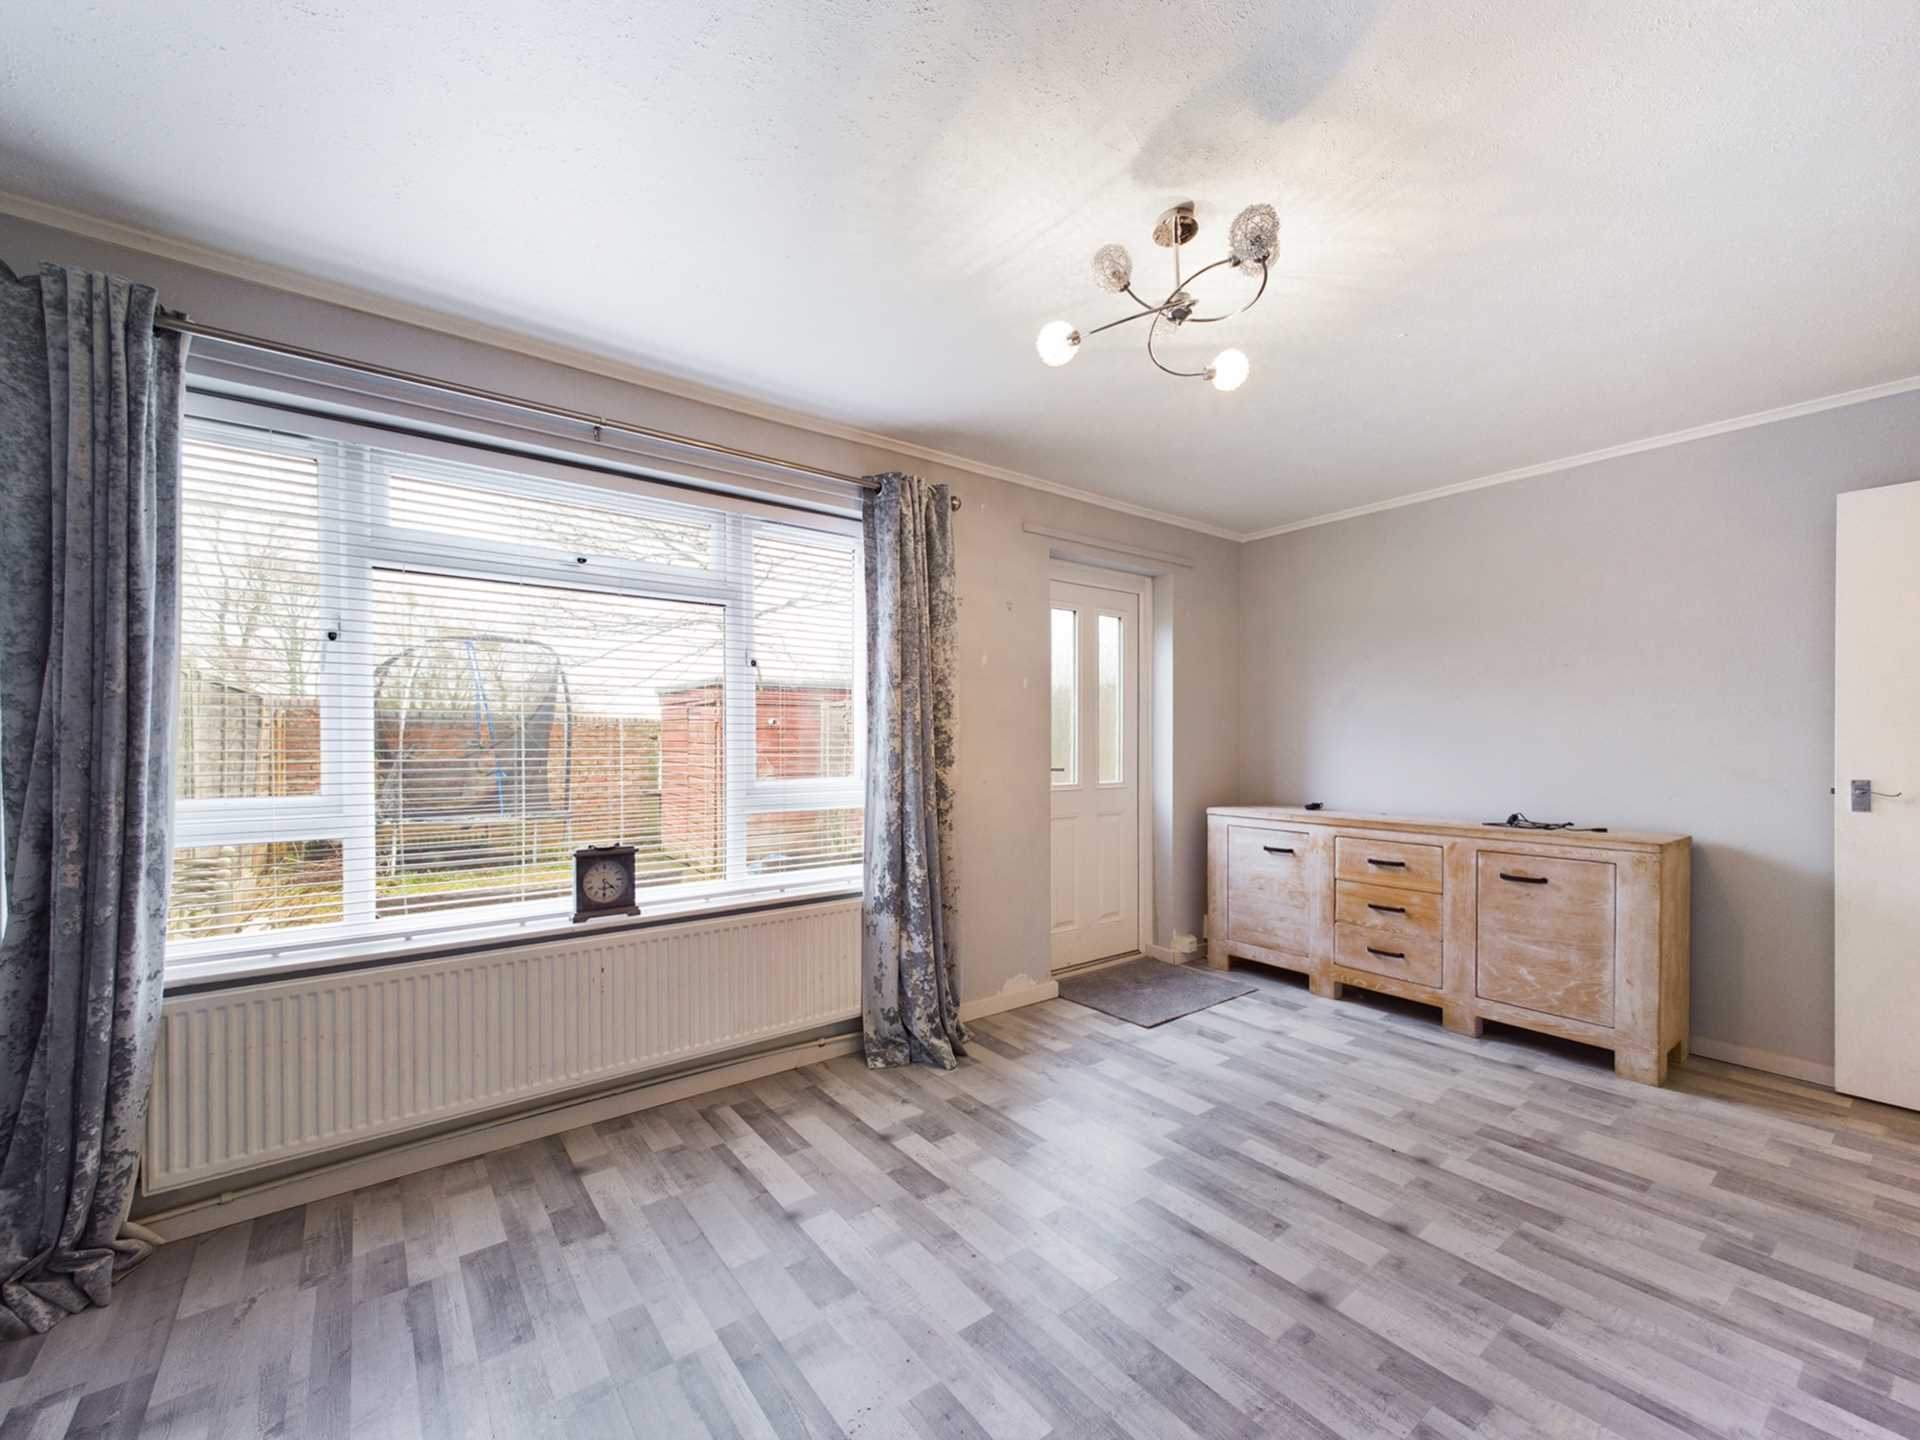 Kingsley Walk, Tring, Unfurnished, Available Now, Image 2